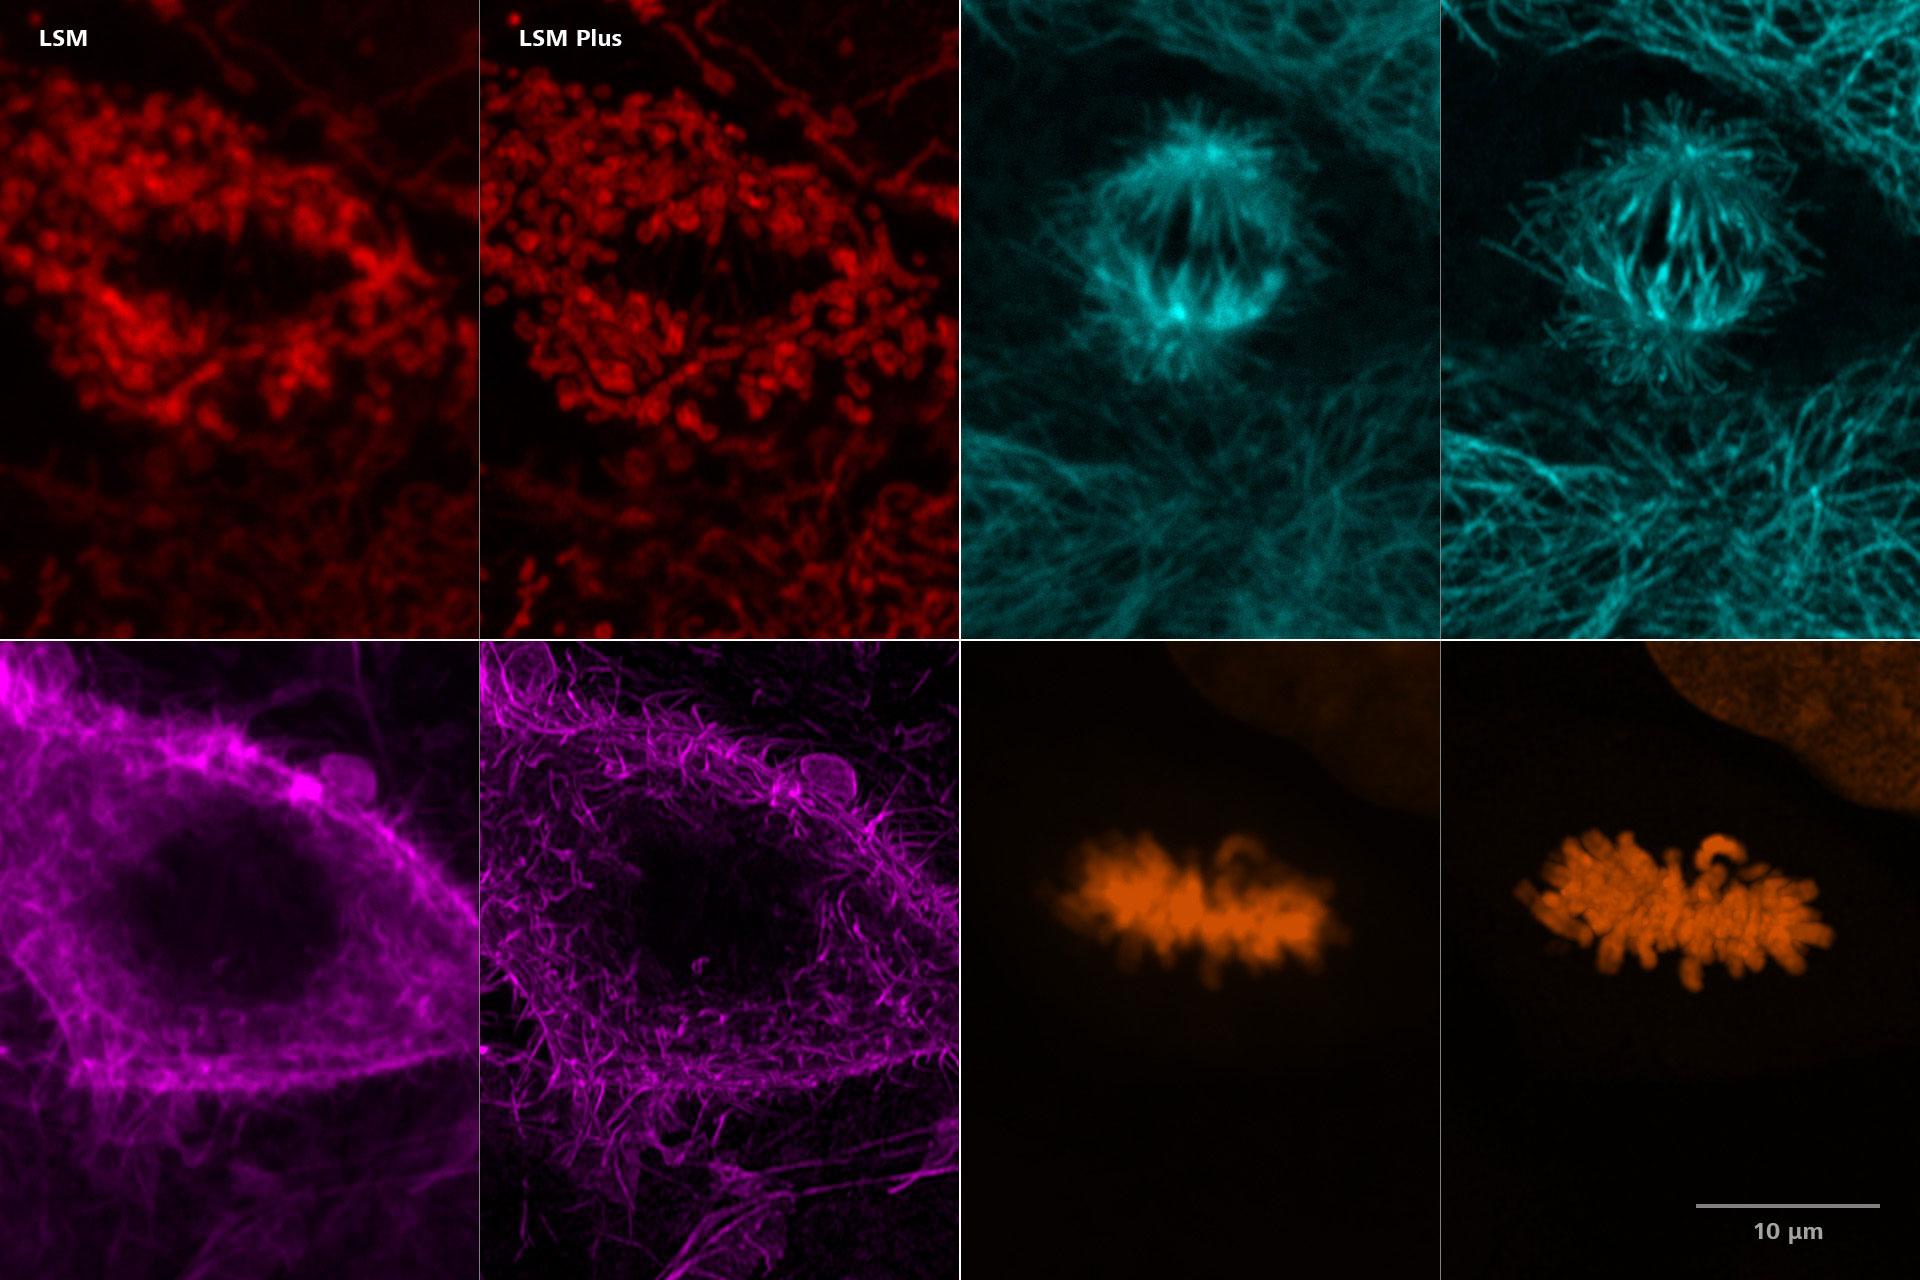 Separated fluorescent signals. The comparison illustrates how LSM Plus improves SNR and resolution.